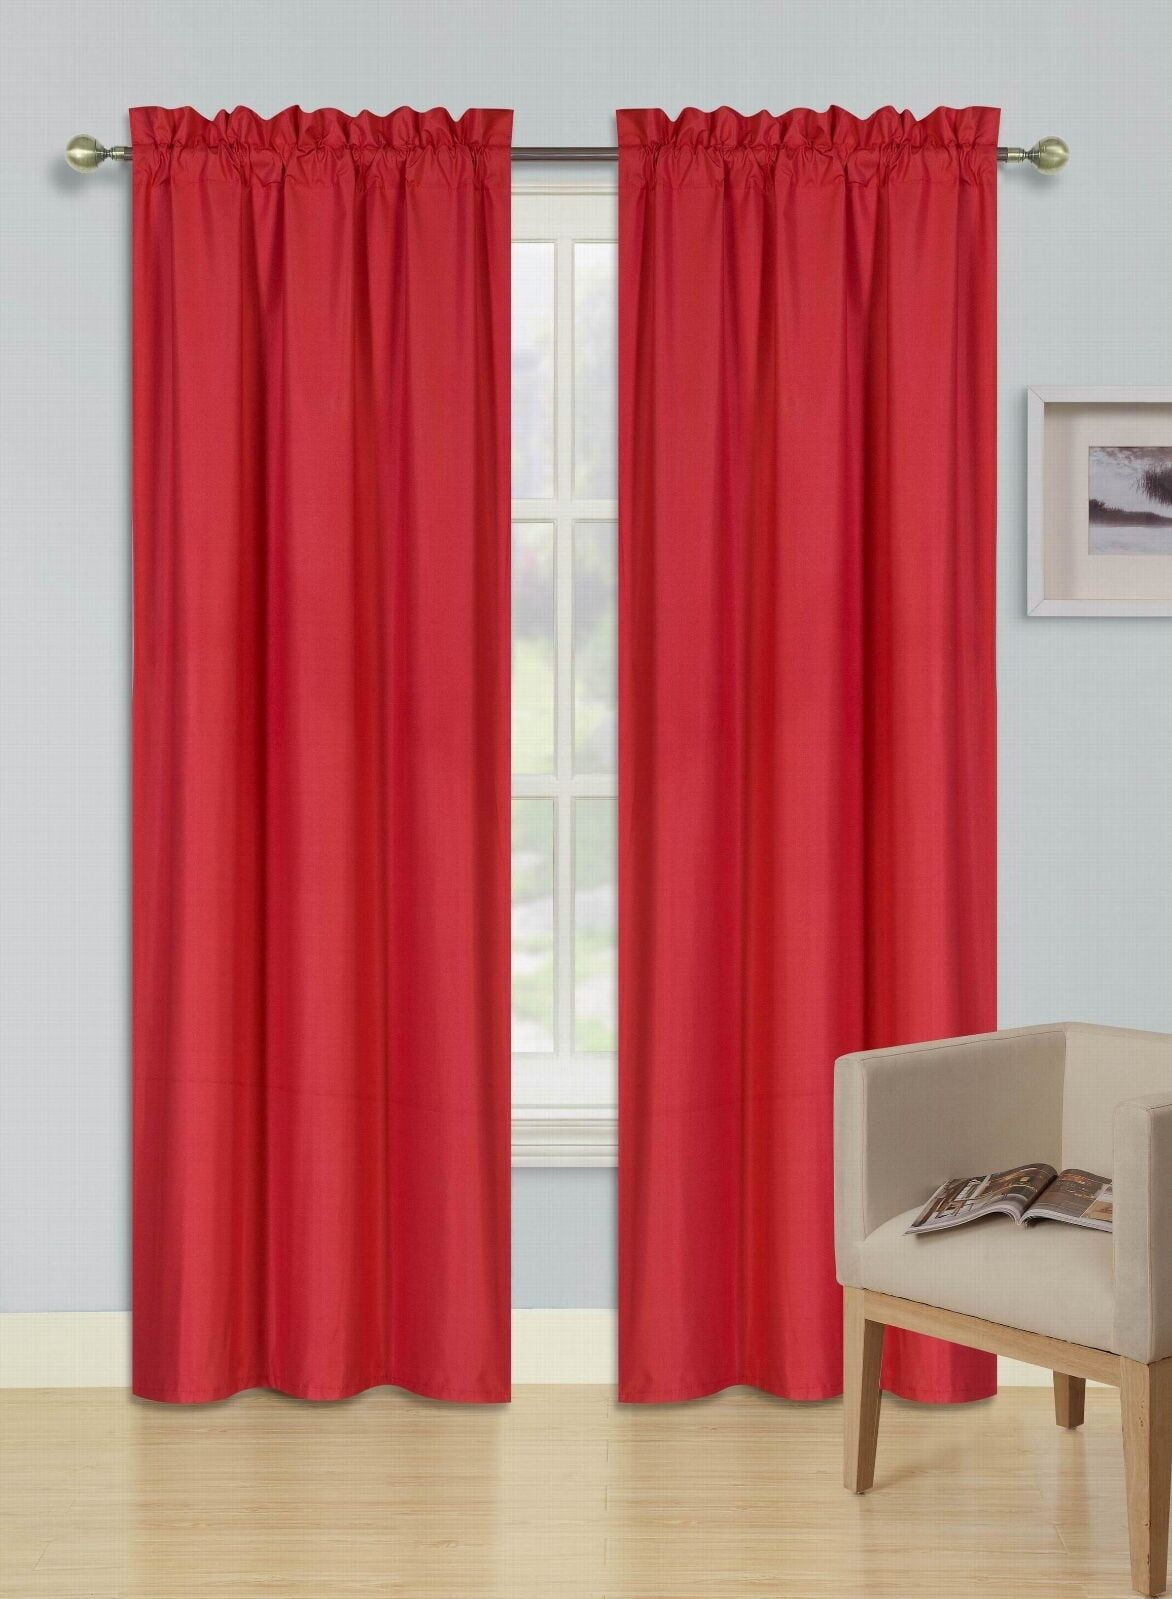 Details about   Red 84 inch Long Fire Treated Velvet Curtain Panel w/Rod Pocket Custom Drapery 